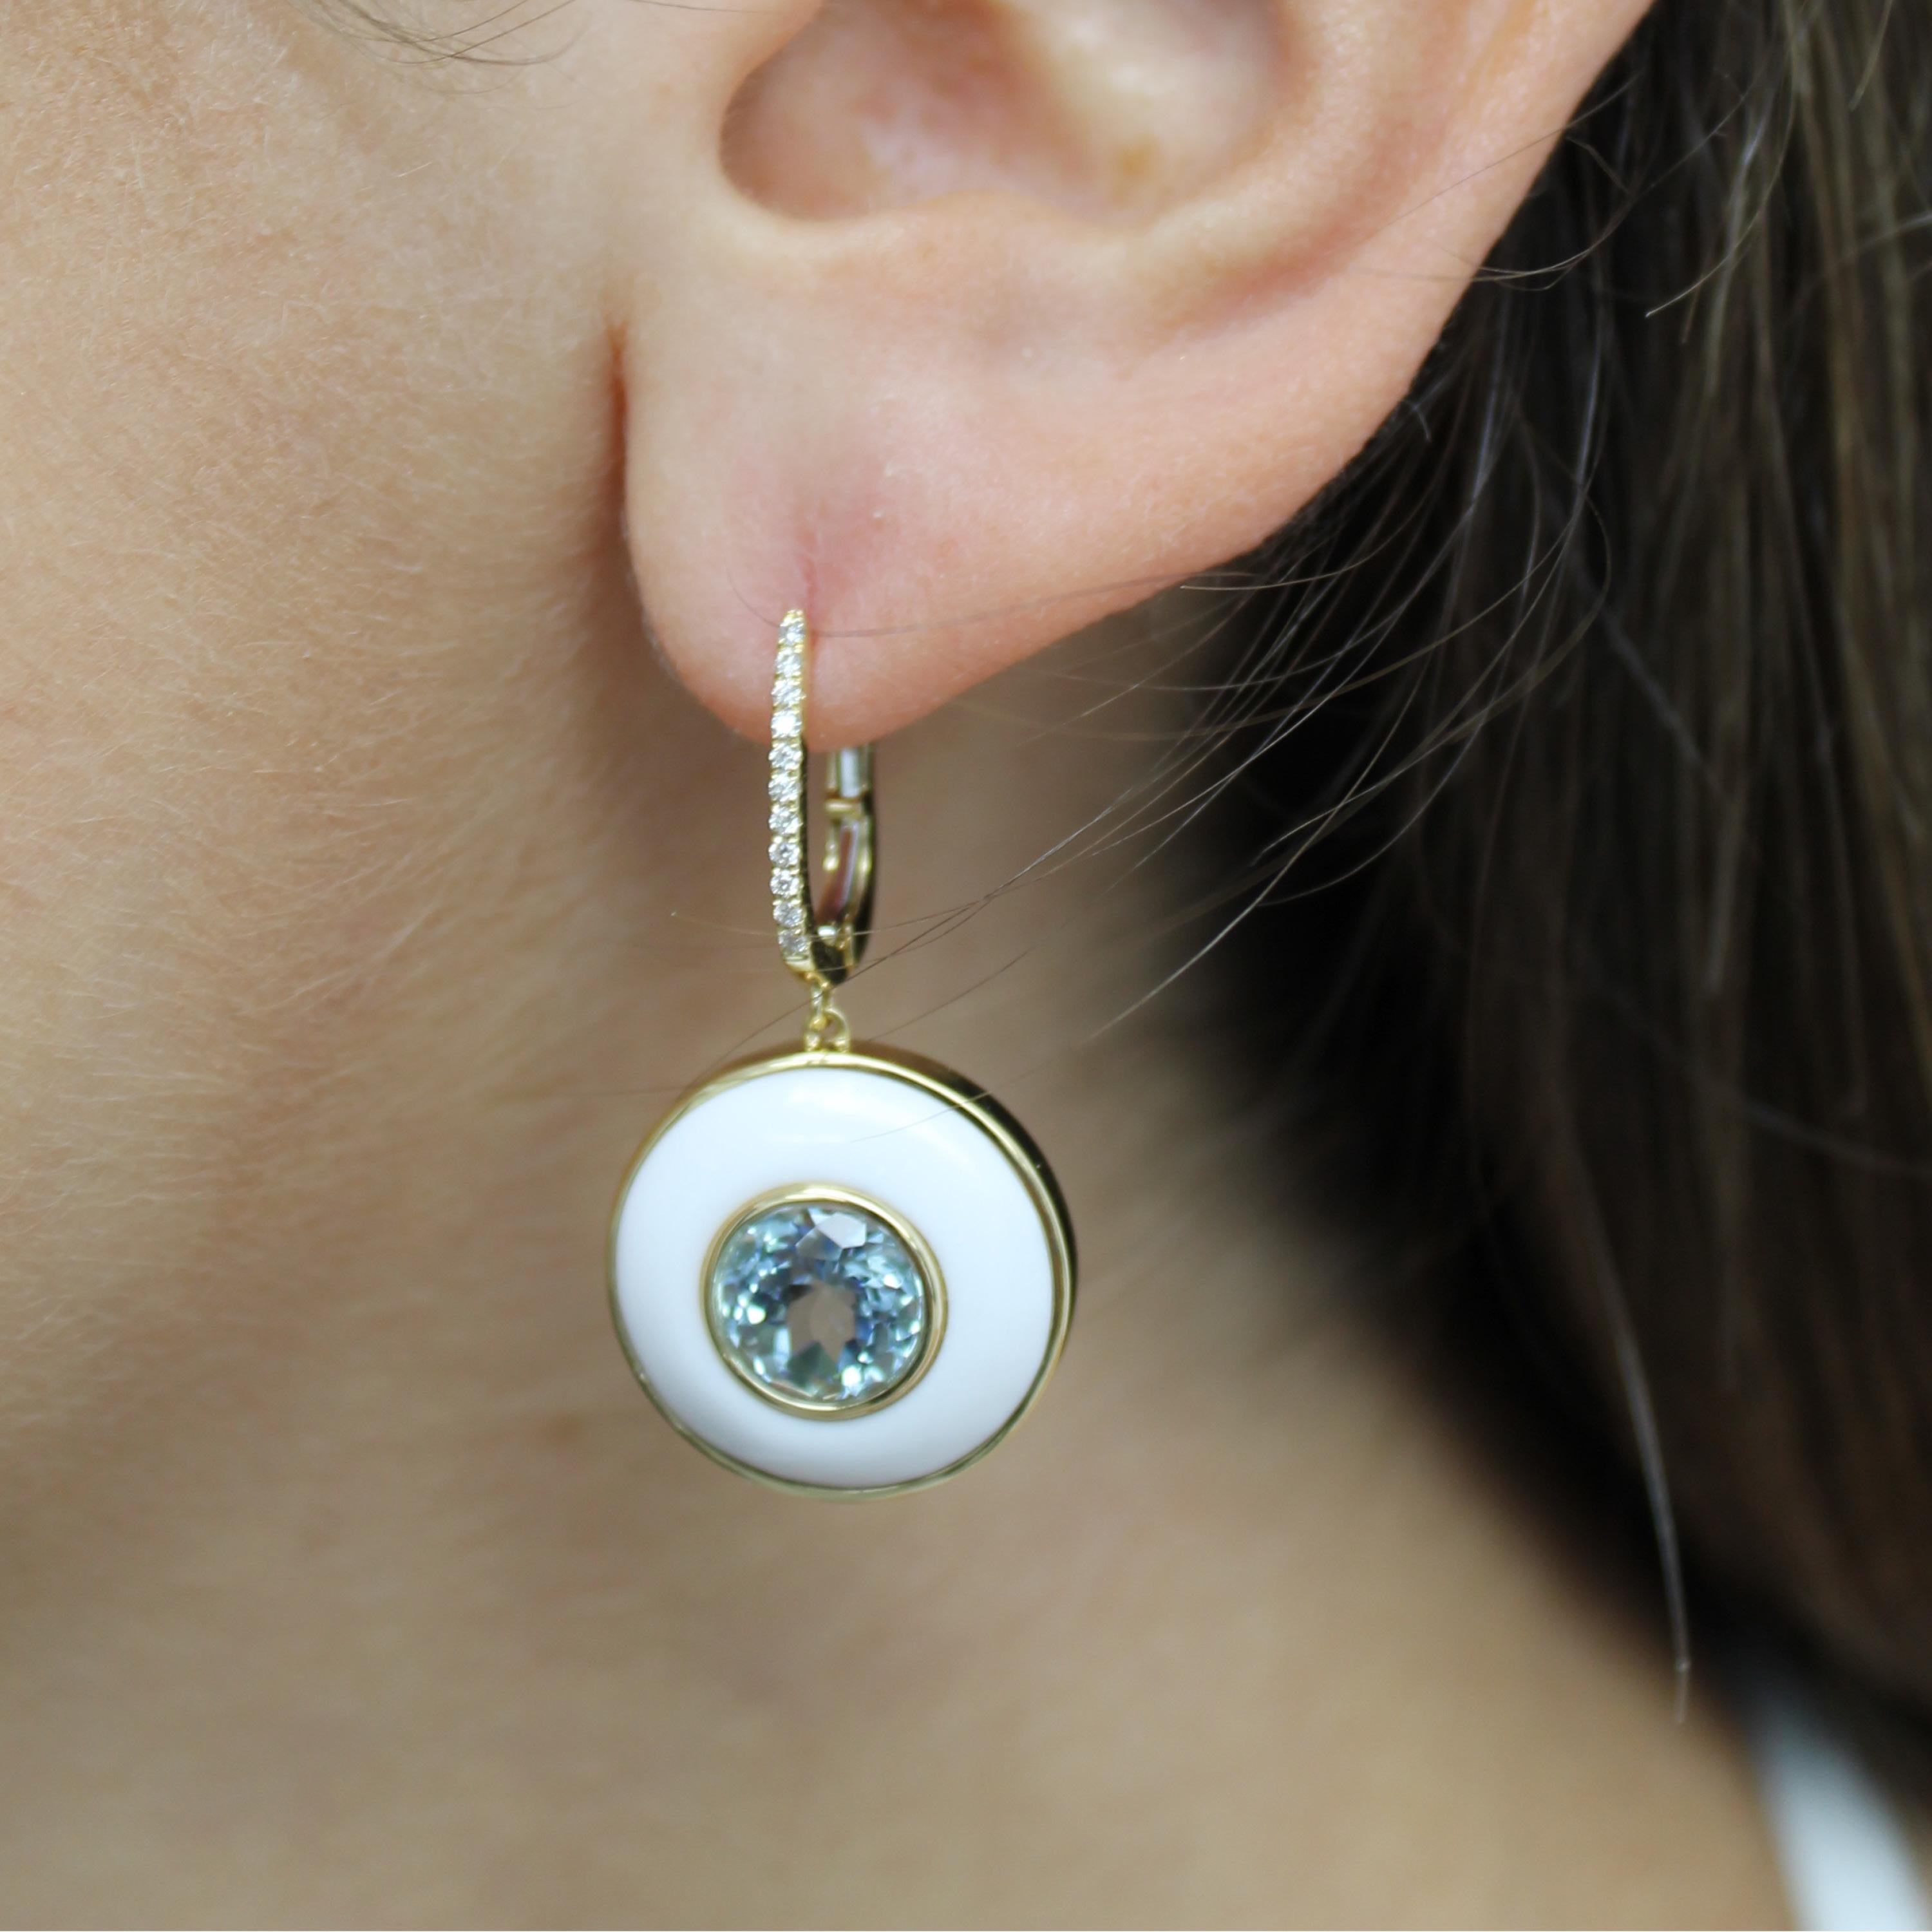 *Please allow 4-6 weeks for delivery*

Mykonos Earrings featuring round, bezel-set Sky Blue Topaz in a White Agate frame, diamond lever-back tops, in 18K yellow gold. The Mykonos collection from Doves by Doron Paloma pays homage to the serene blue